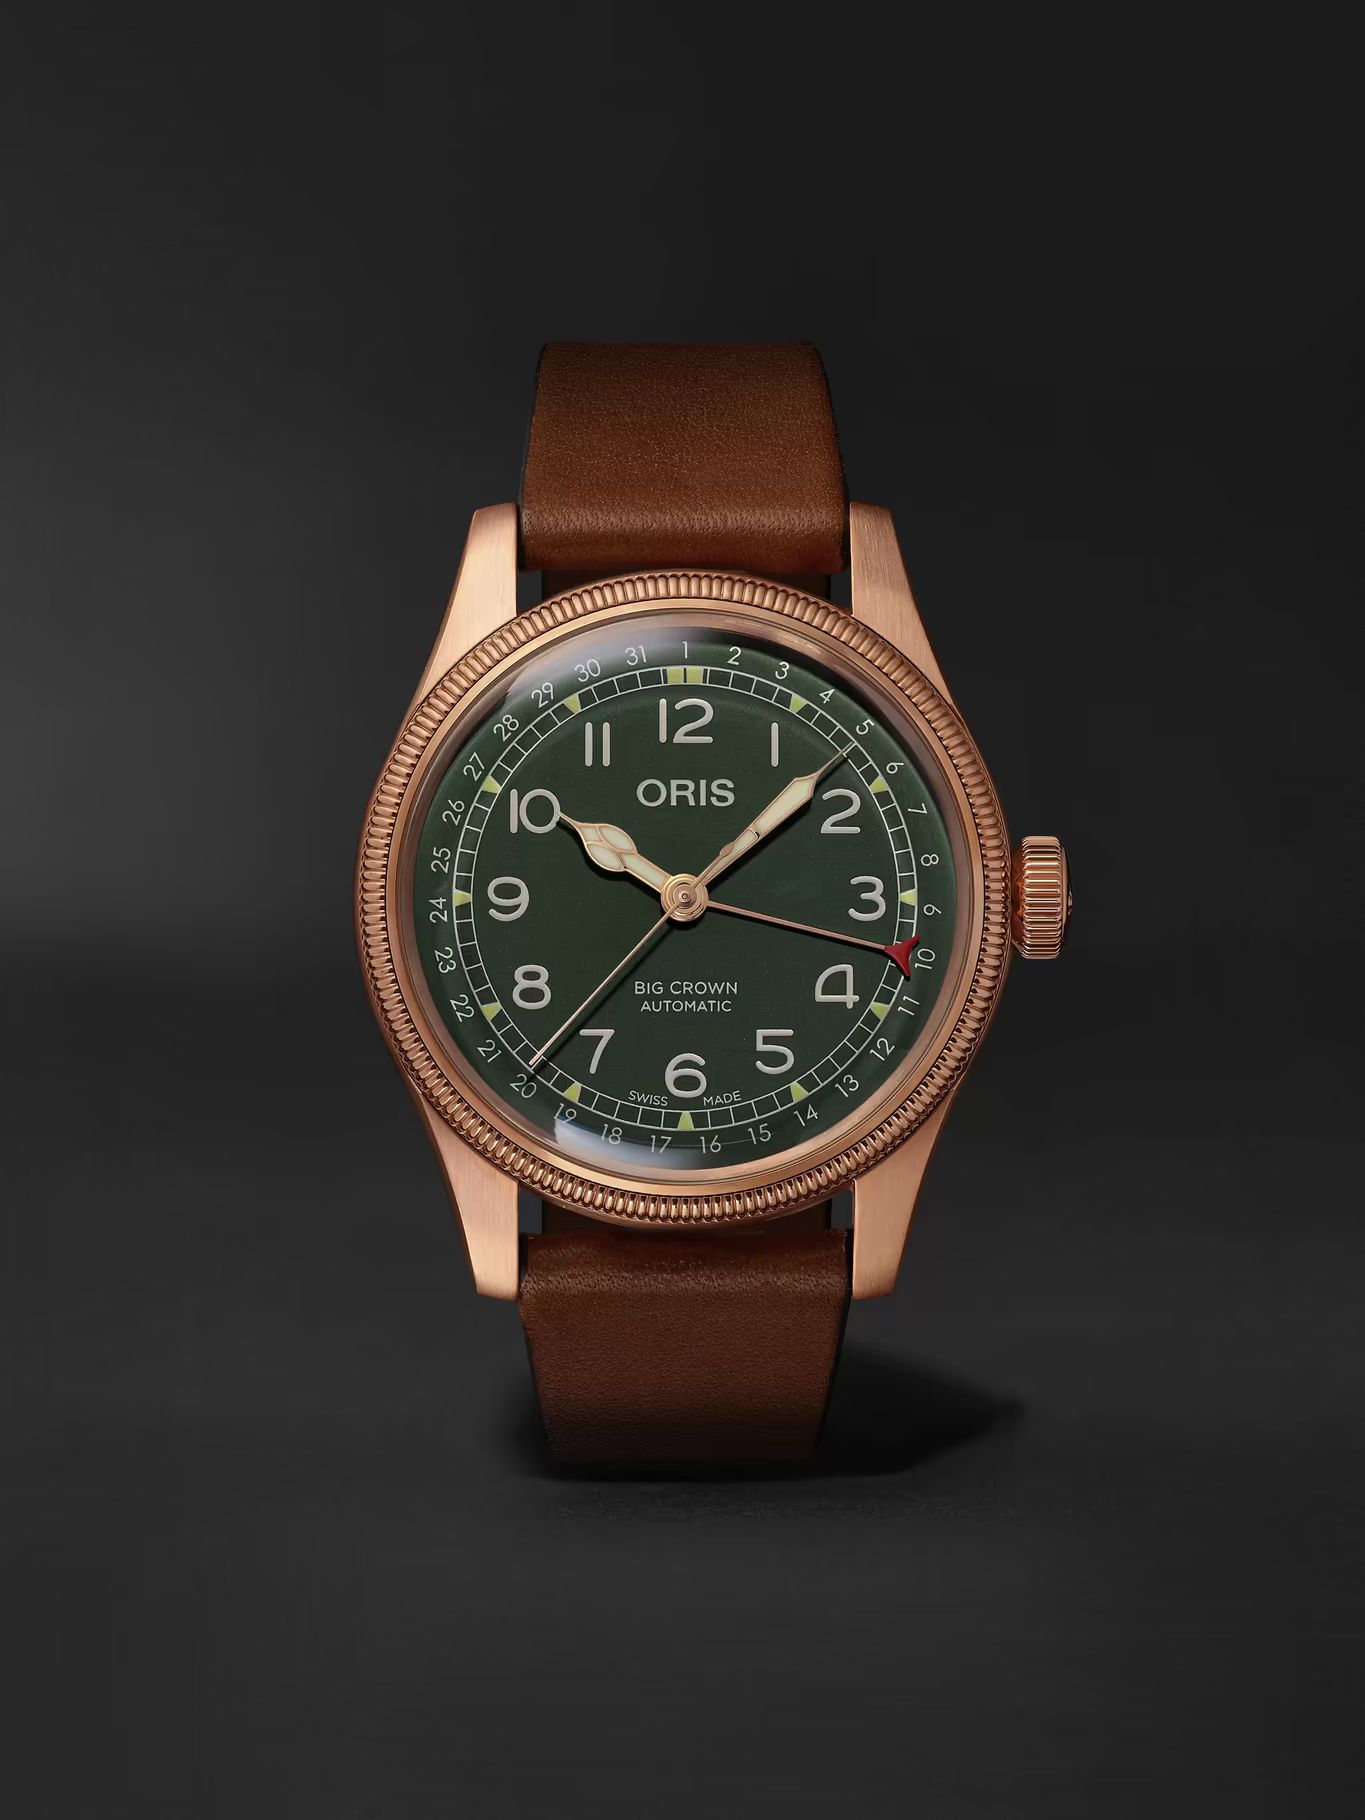 Big Crown Pointer Date Automatic 40mm Bronze and Leather Watch, Ref. No. 01 754 7741 3167-07 5 20... | Mr Porter (US & CA)